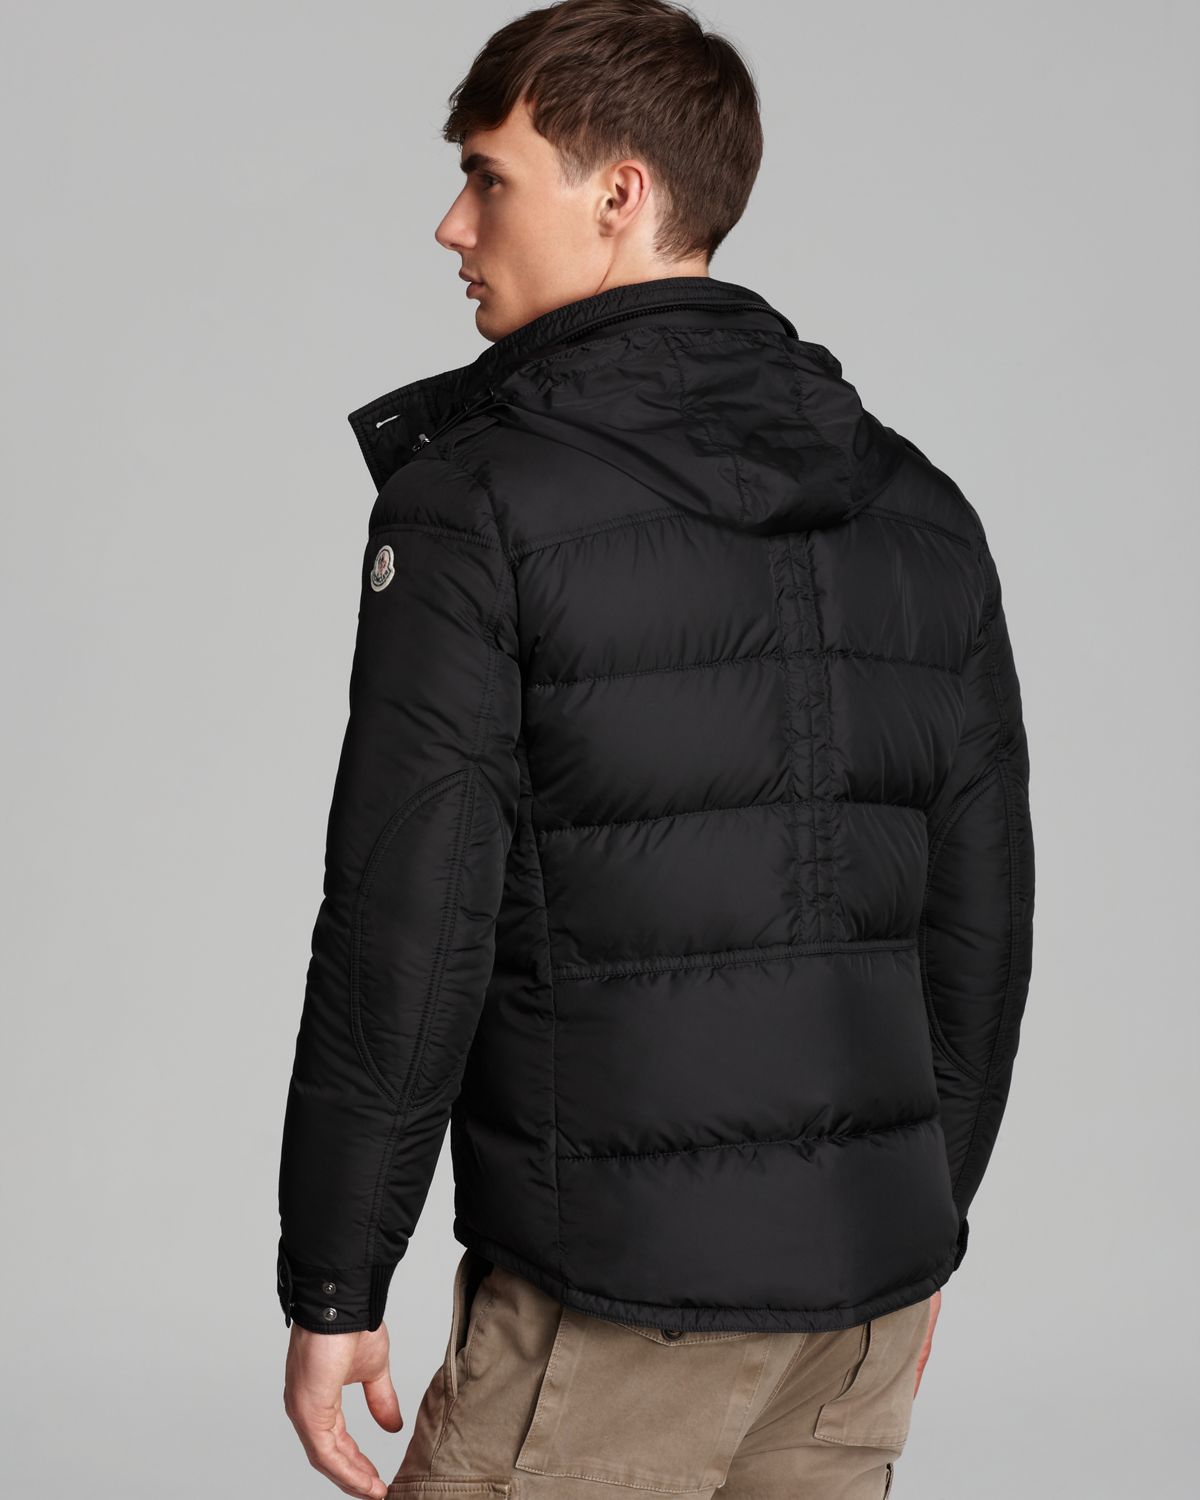 Moncler Tours Military Jacket in Black 